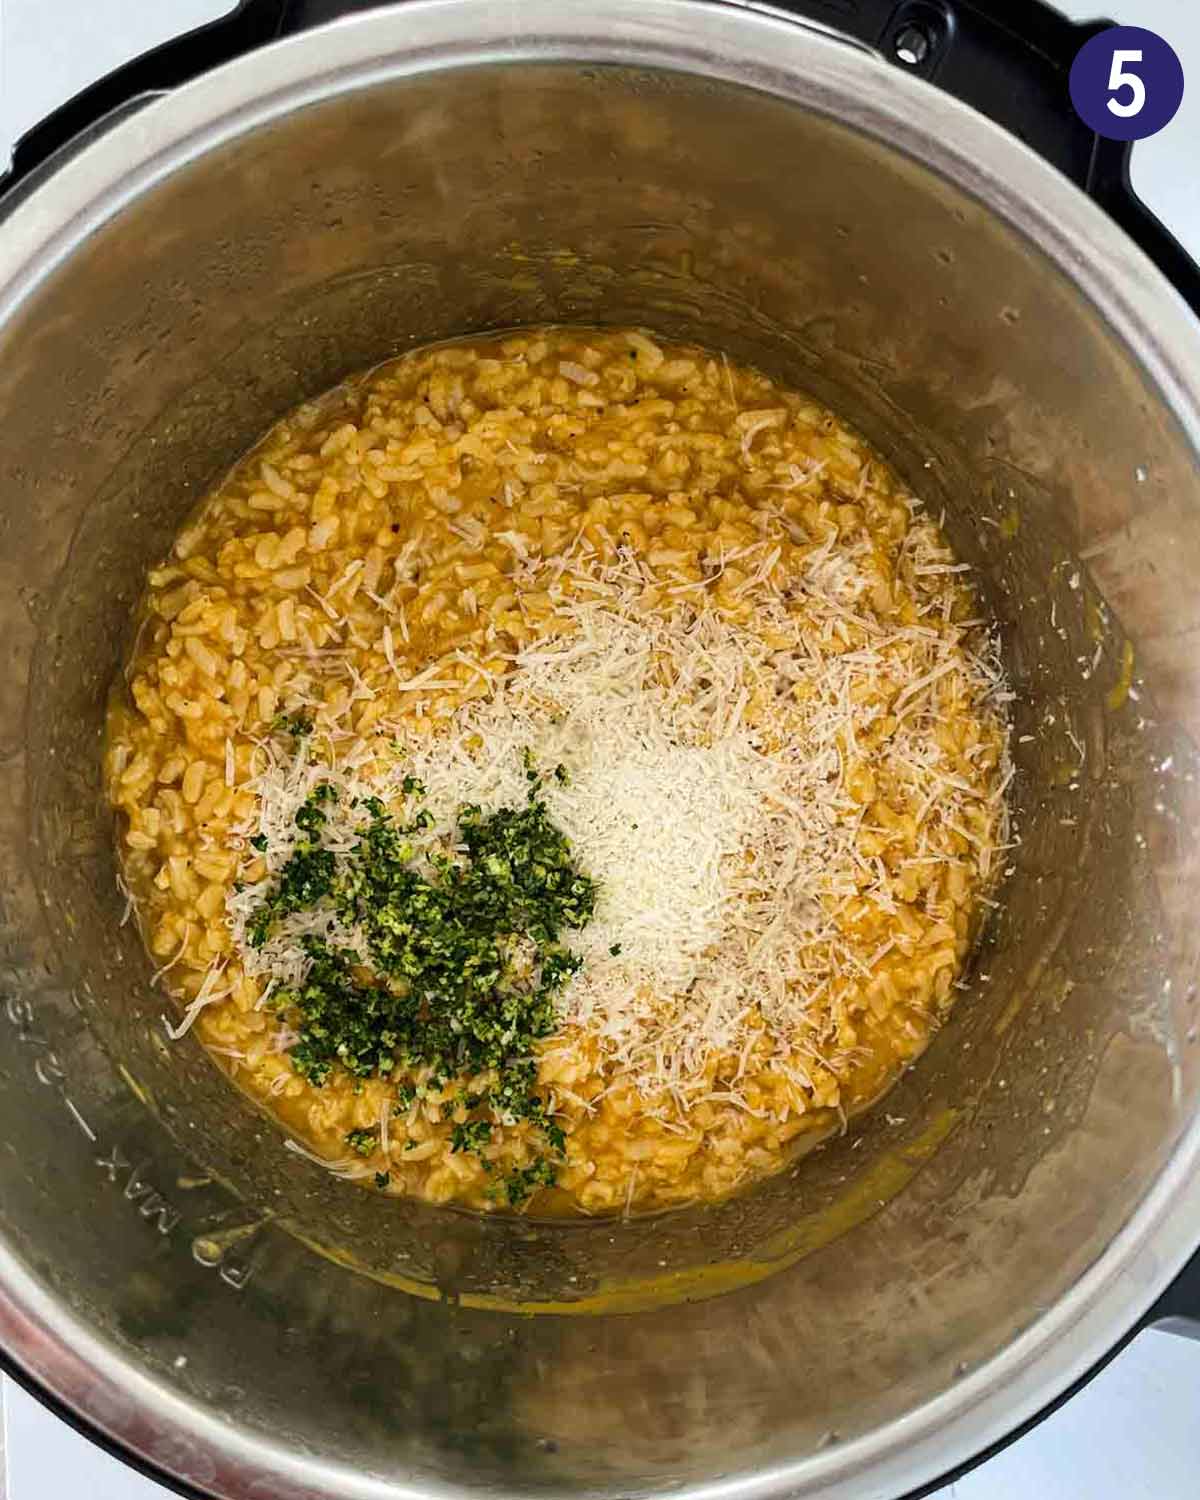 Pumpkin risotto after cooking in Instant Pot with fresh gremolata and parmesan cheese.